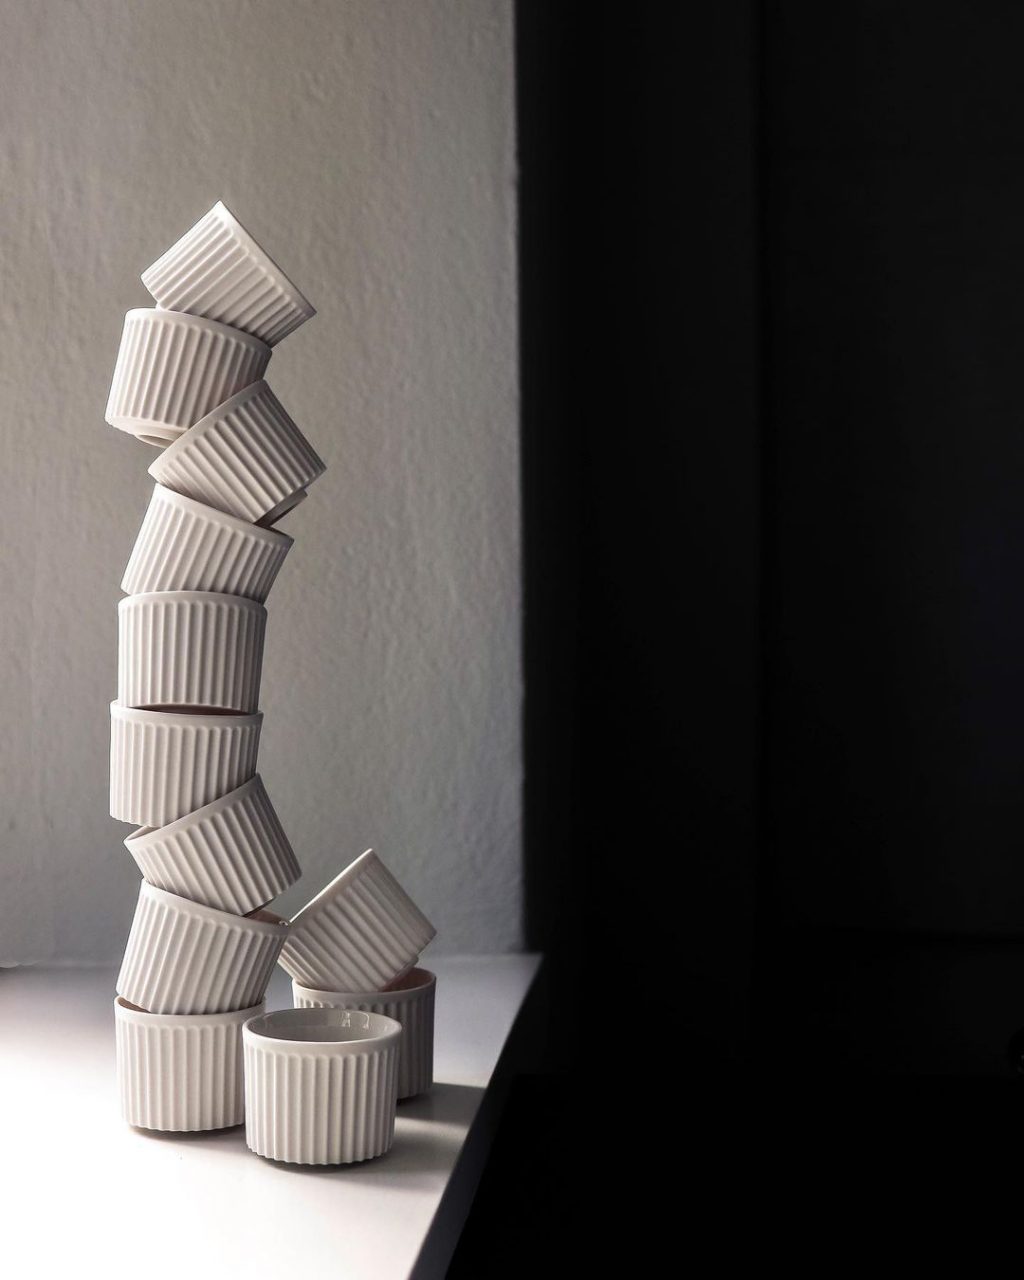 ceramic cups shown in a sculptural tower form showcasing new designs from Danish brand Subjective